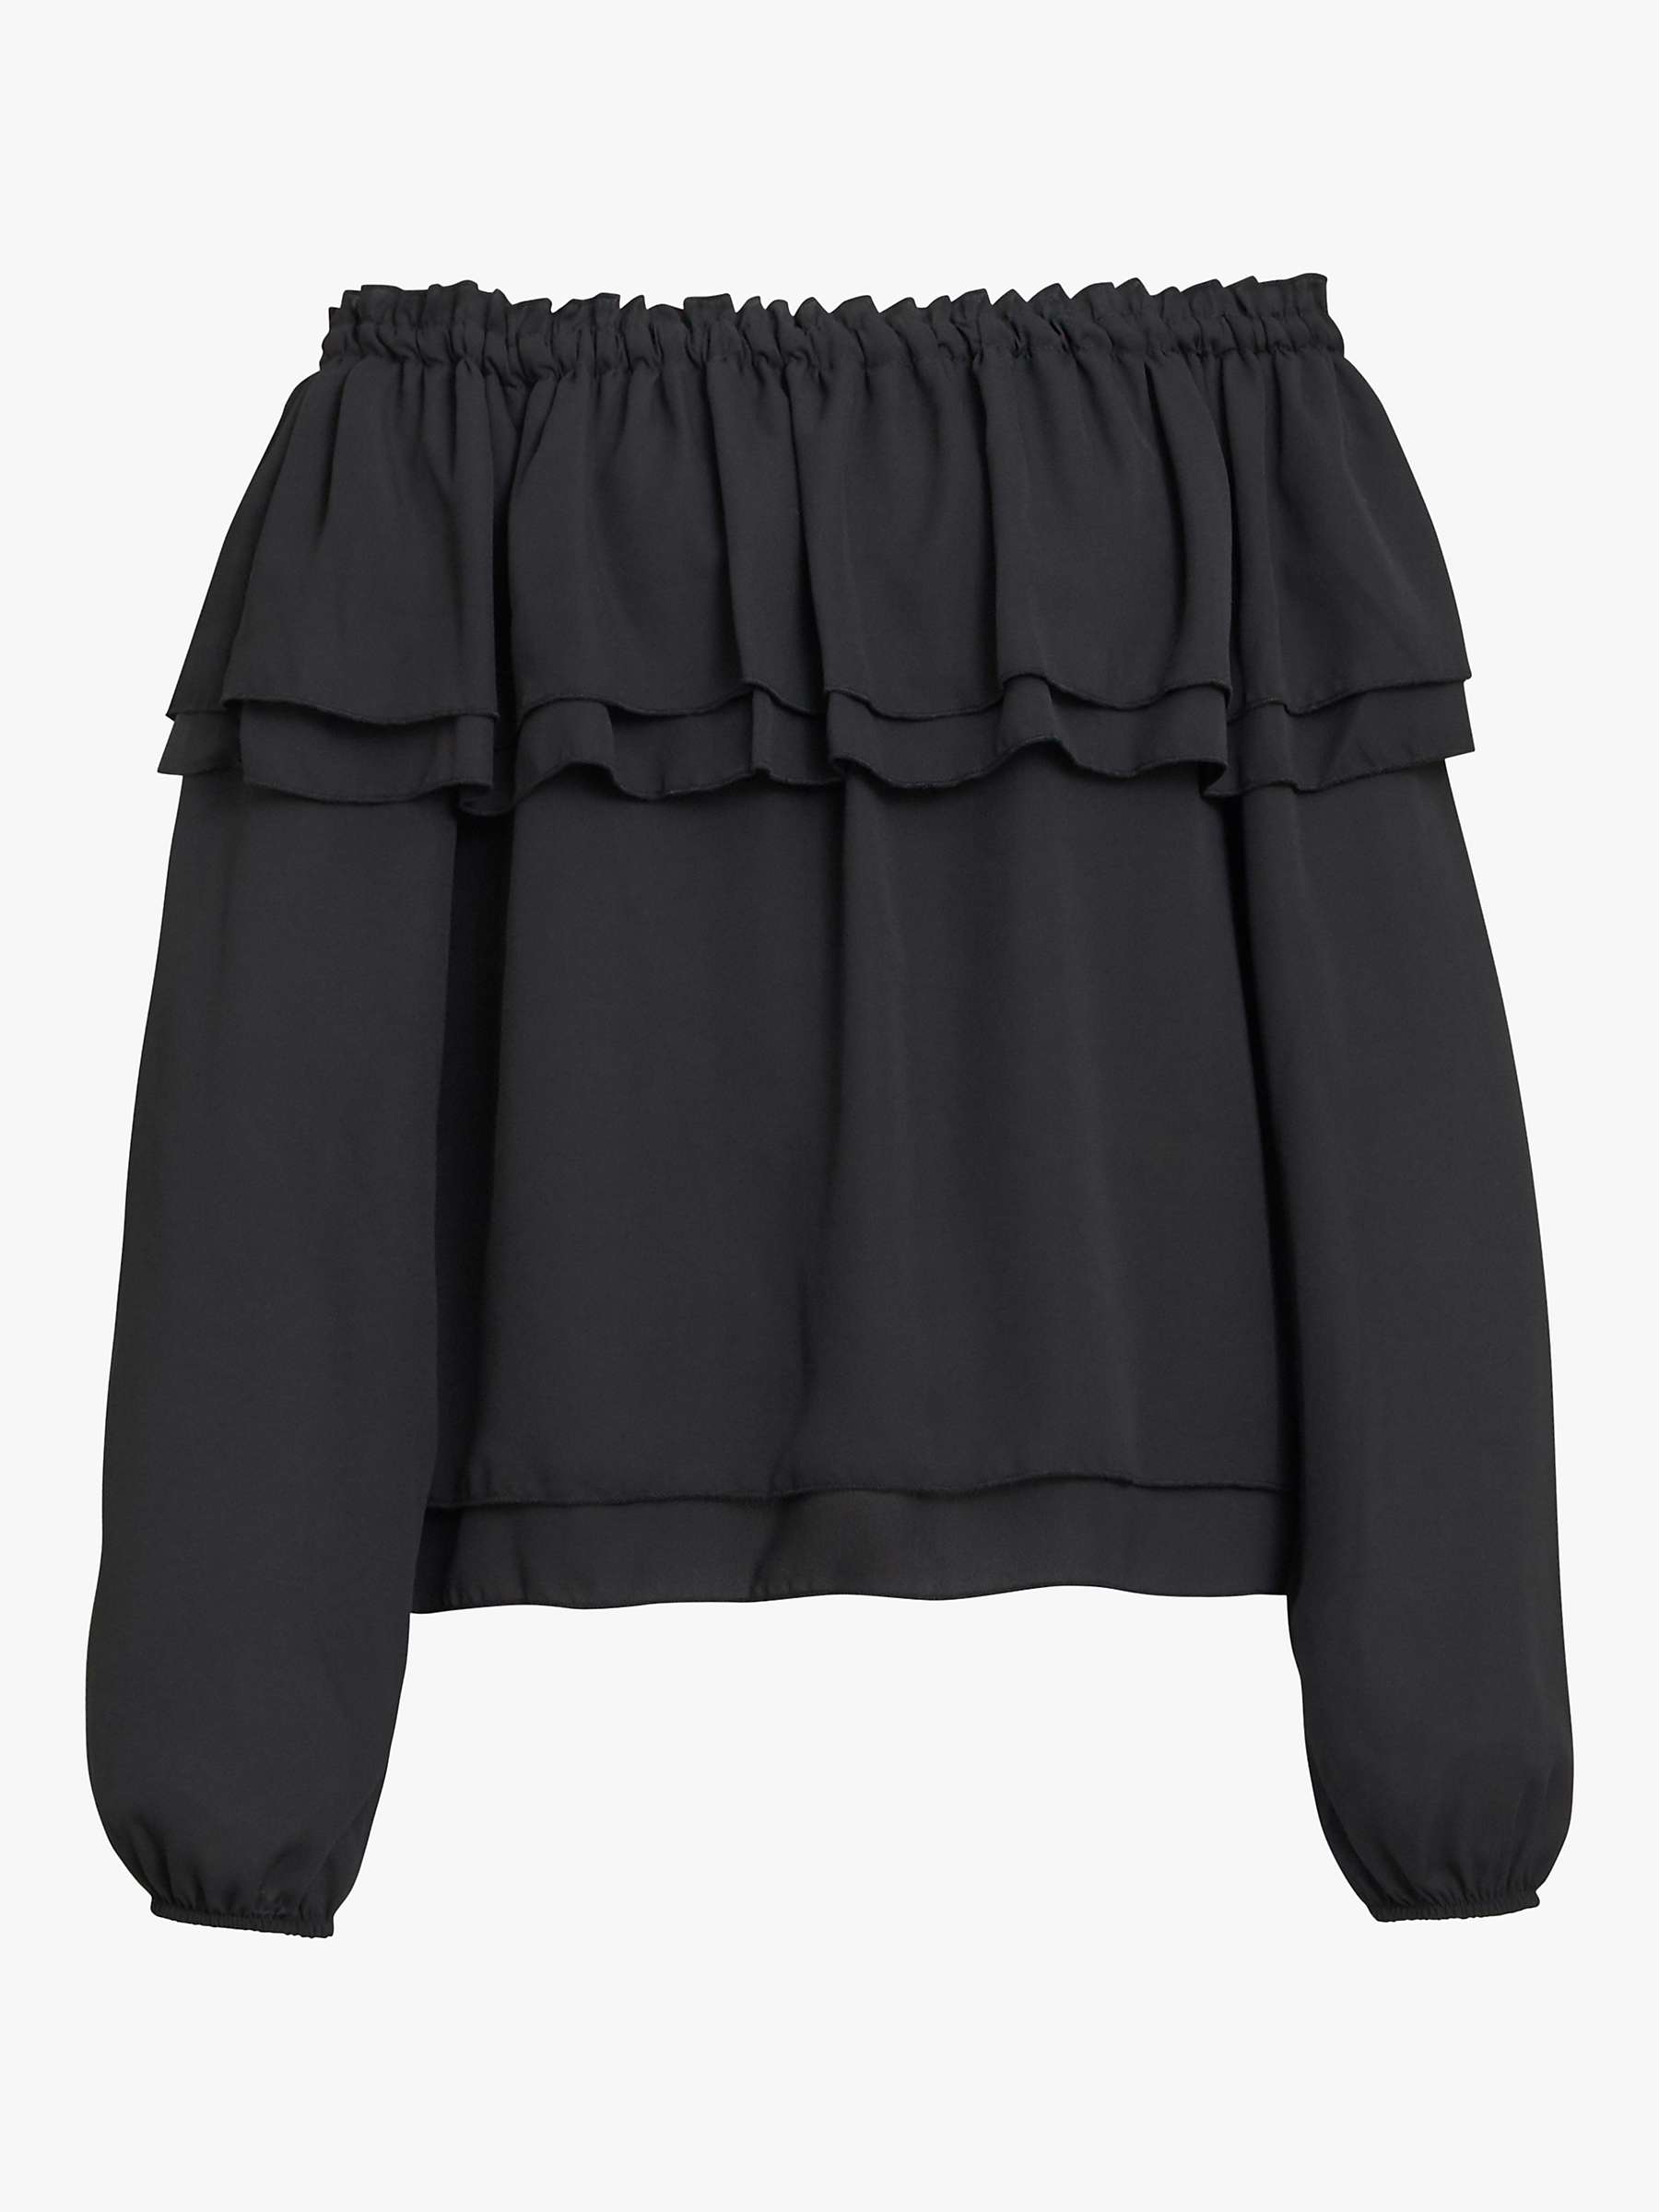 Buy Gina Bacconi Tamora Tiered Blouse Online at johnlewis.com